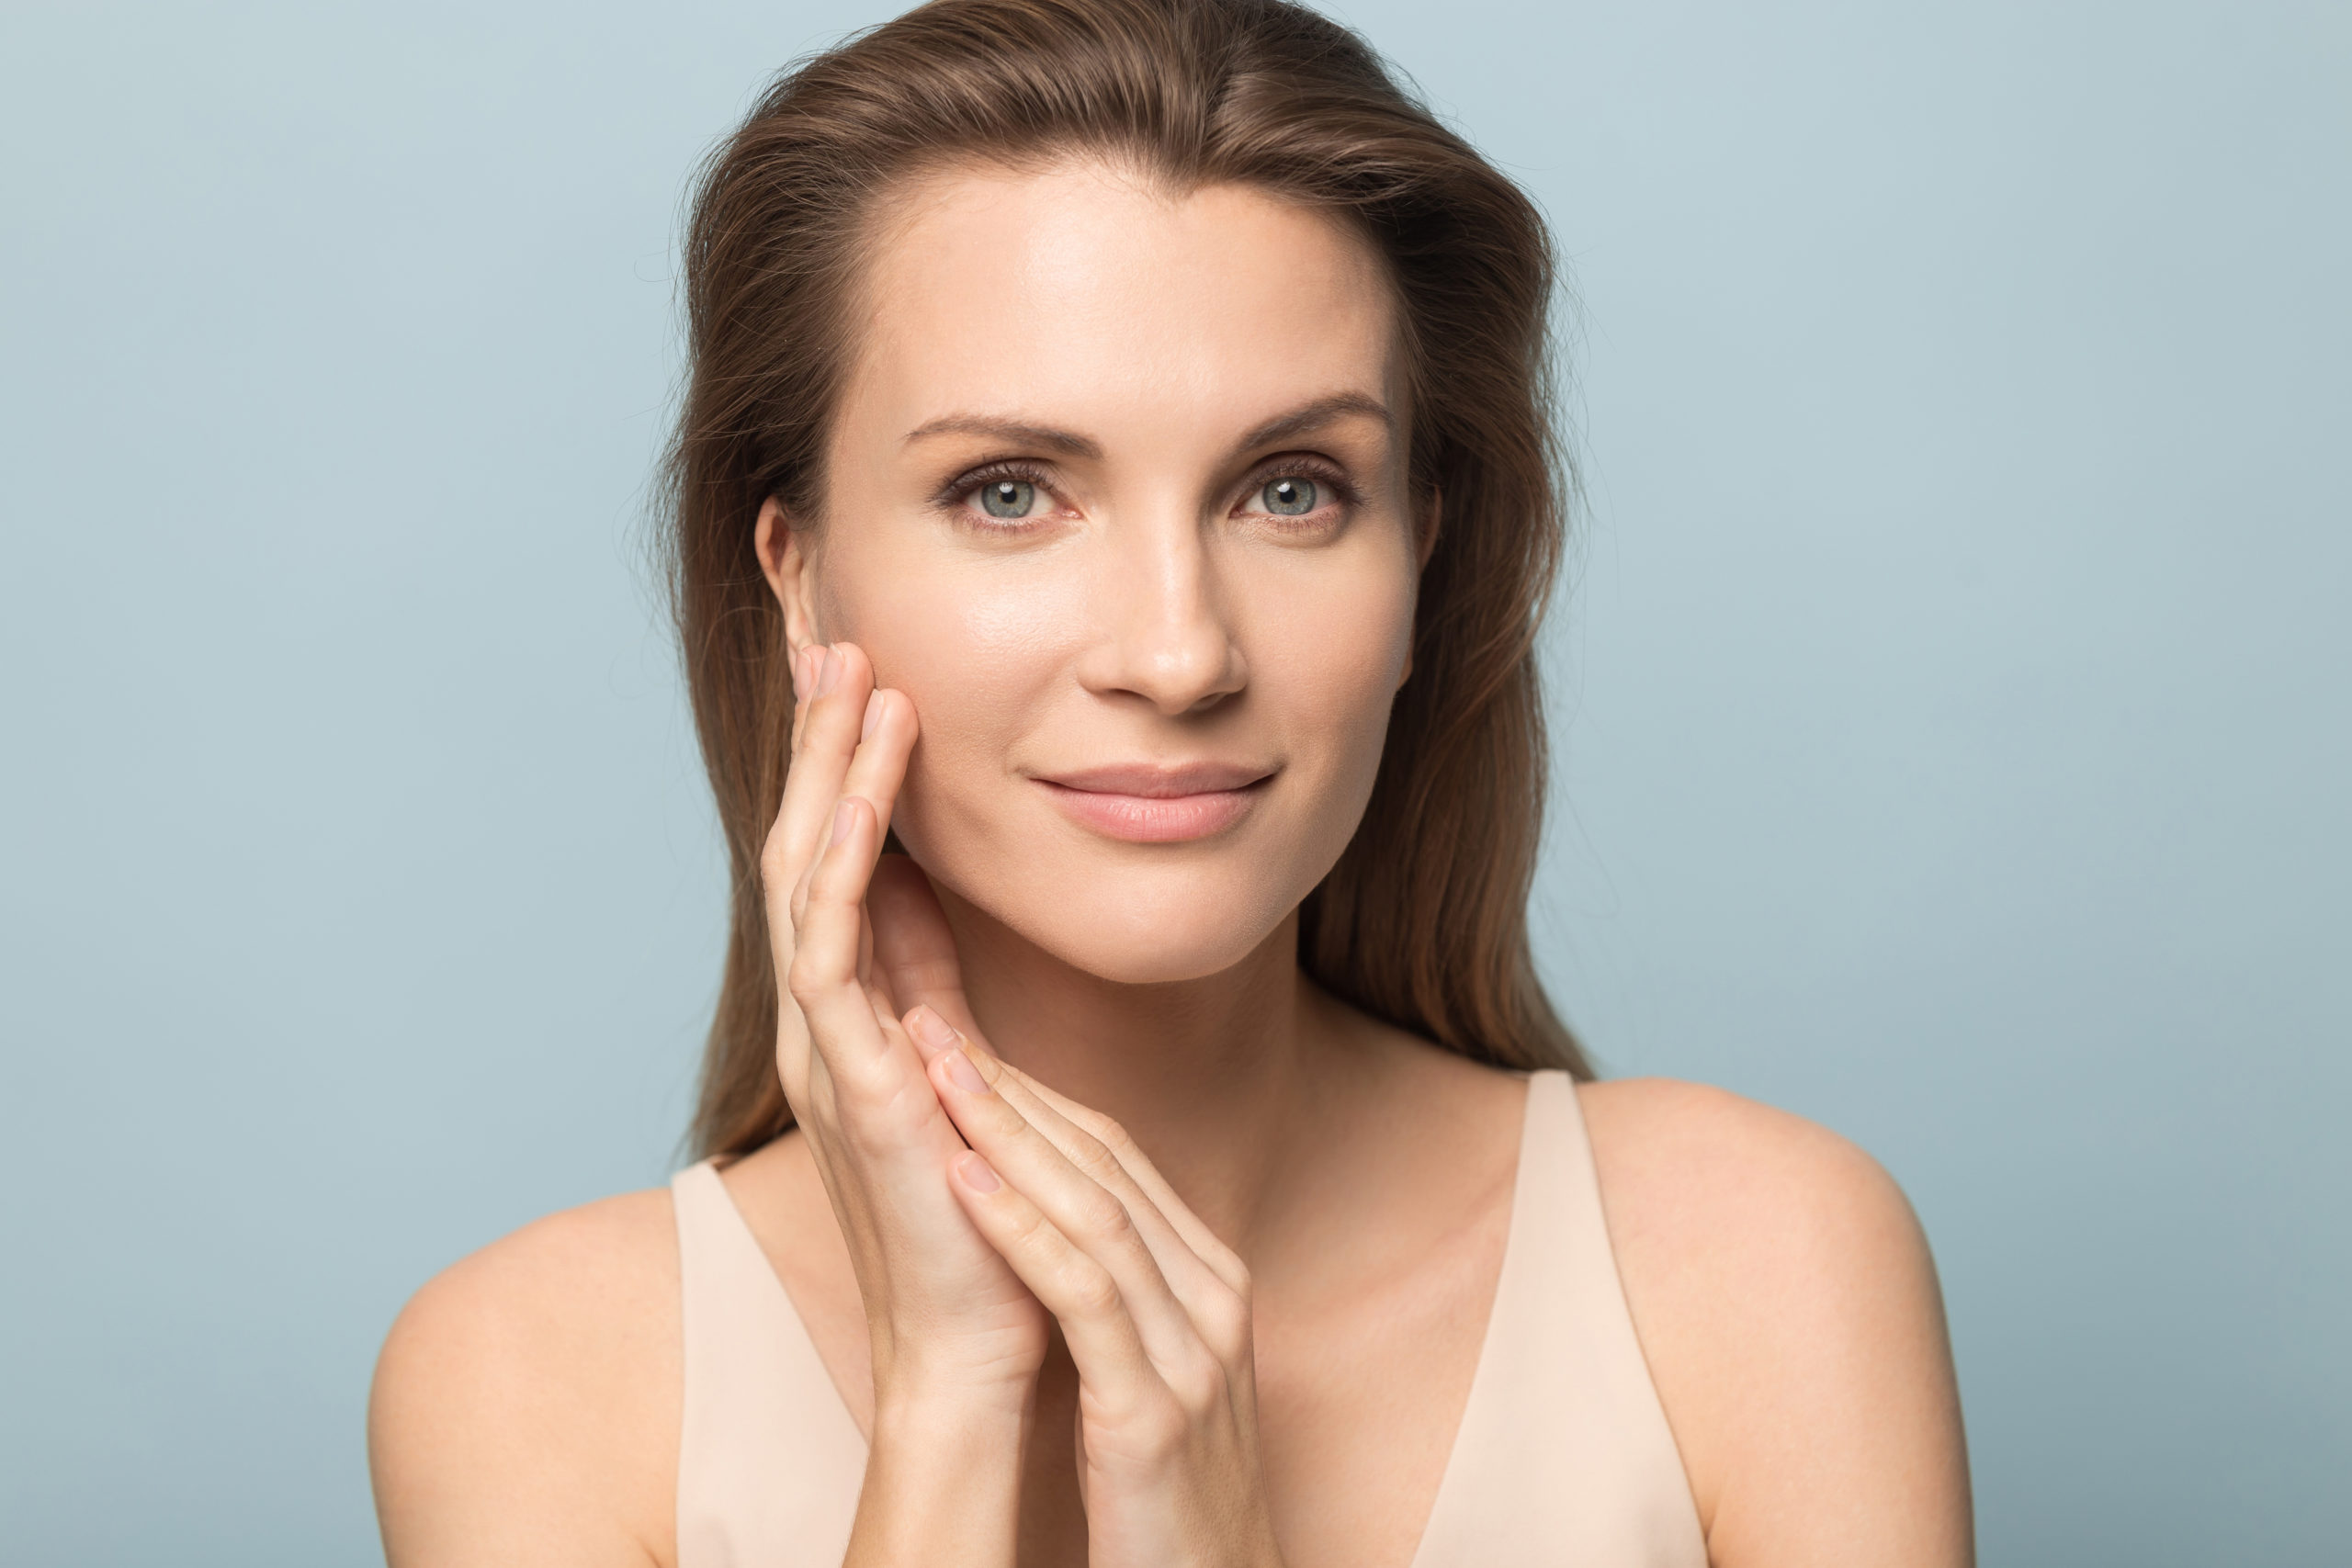 3 Ways Matrix CO2 Fractional Laser Treatment Can Help Your Skin